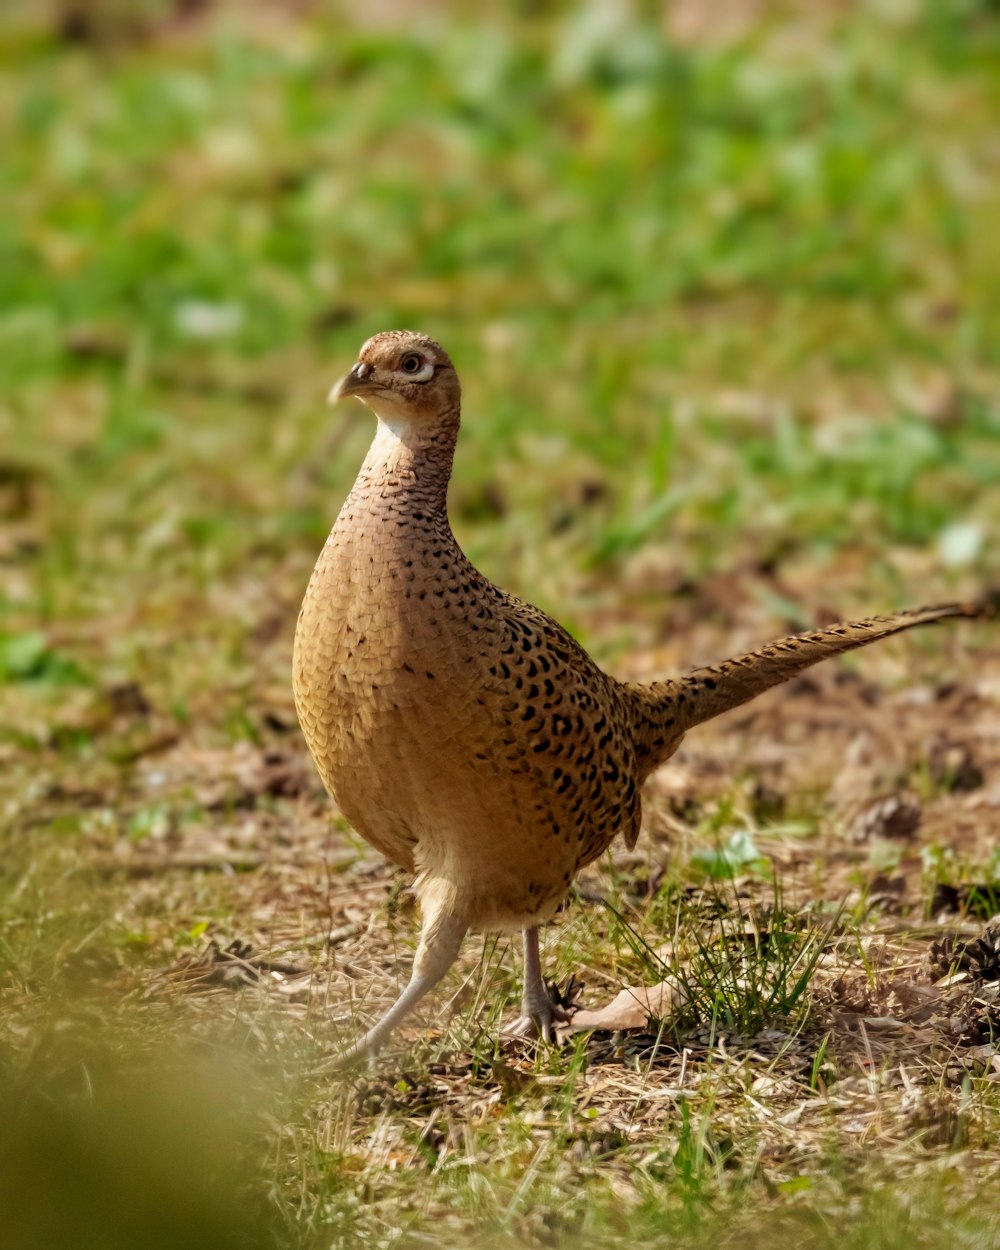 a small bird standing on top of a grass covered field